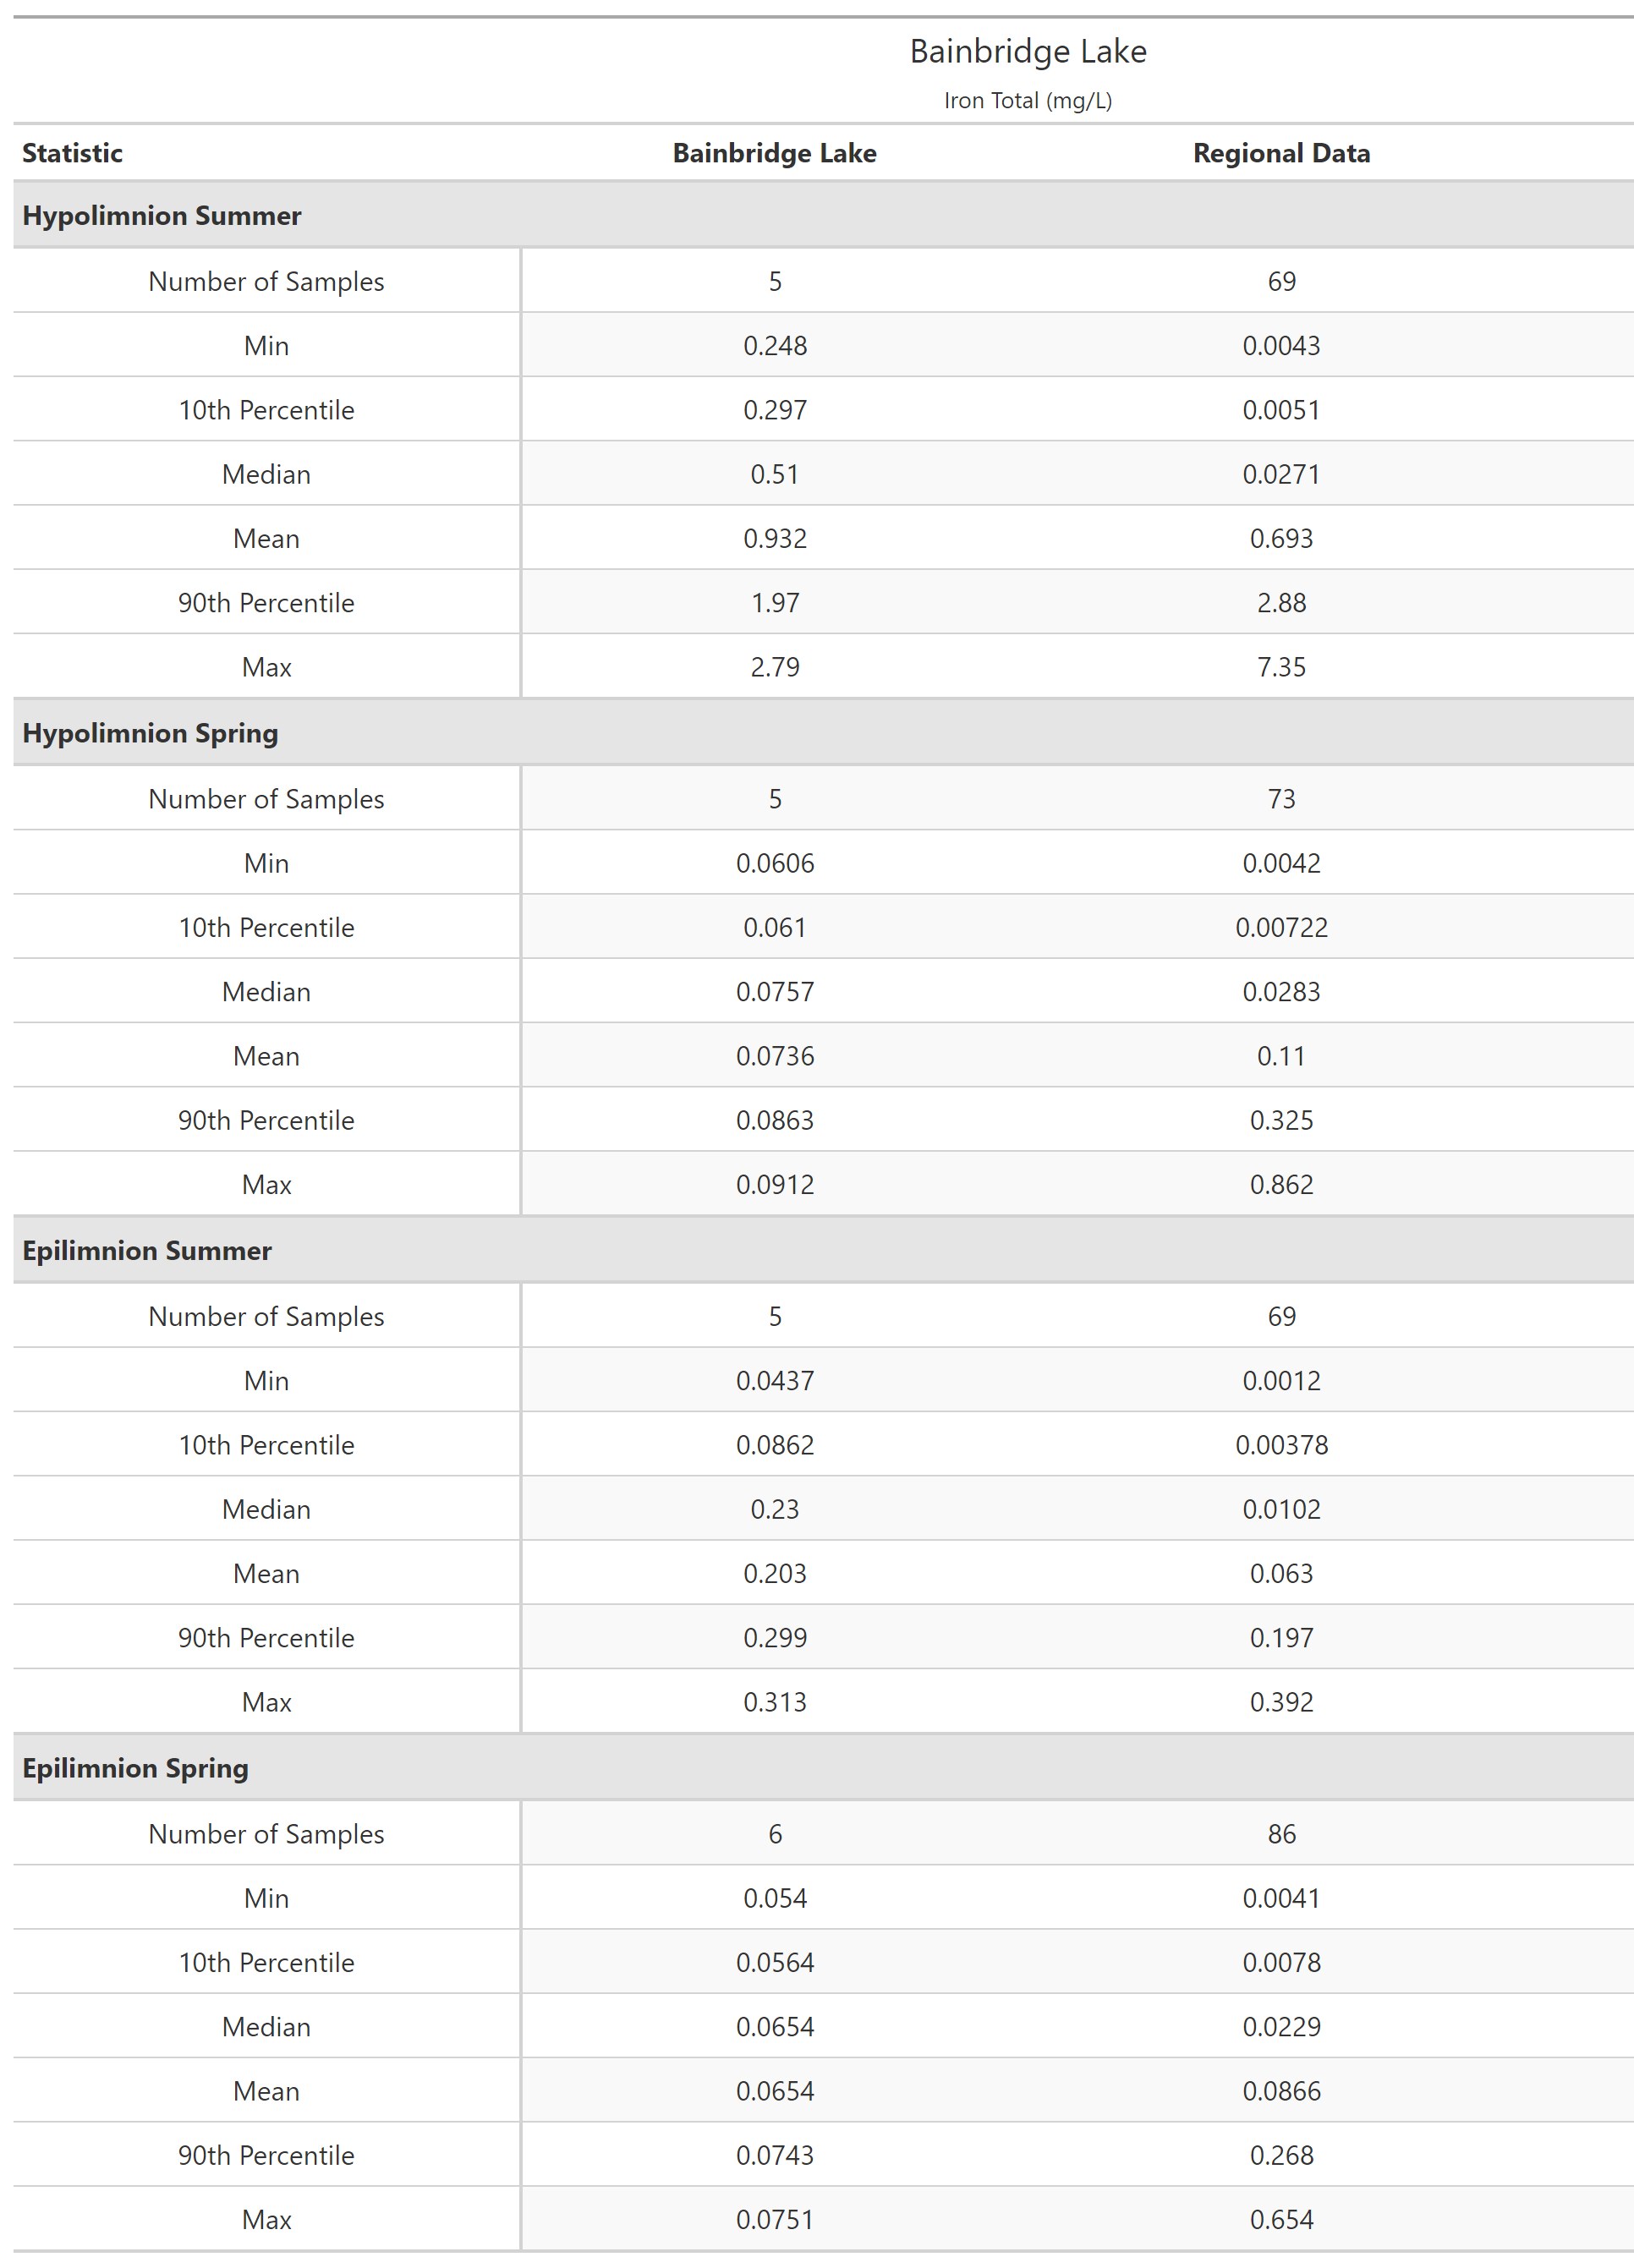 A table of summary statistics for Iron Total with comparison to regional data